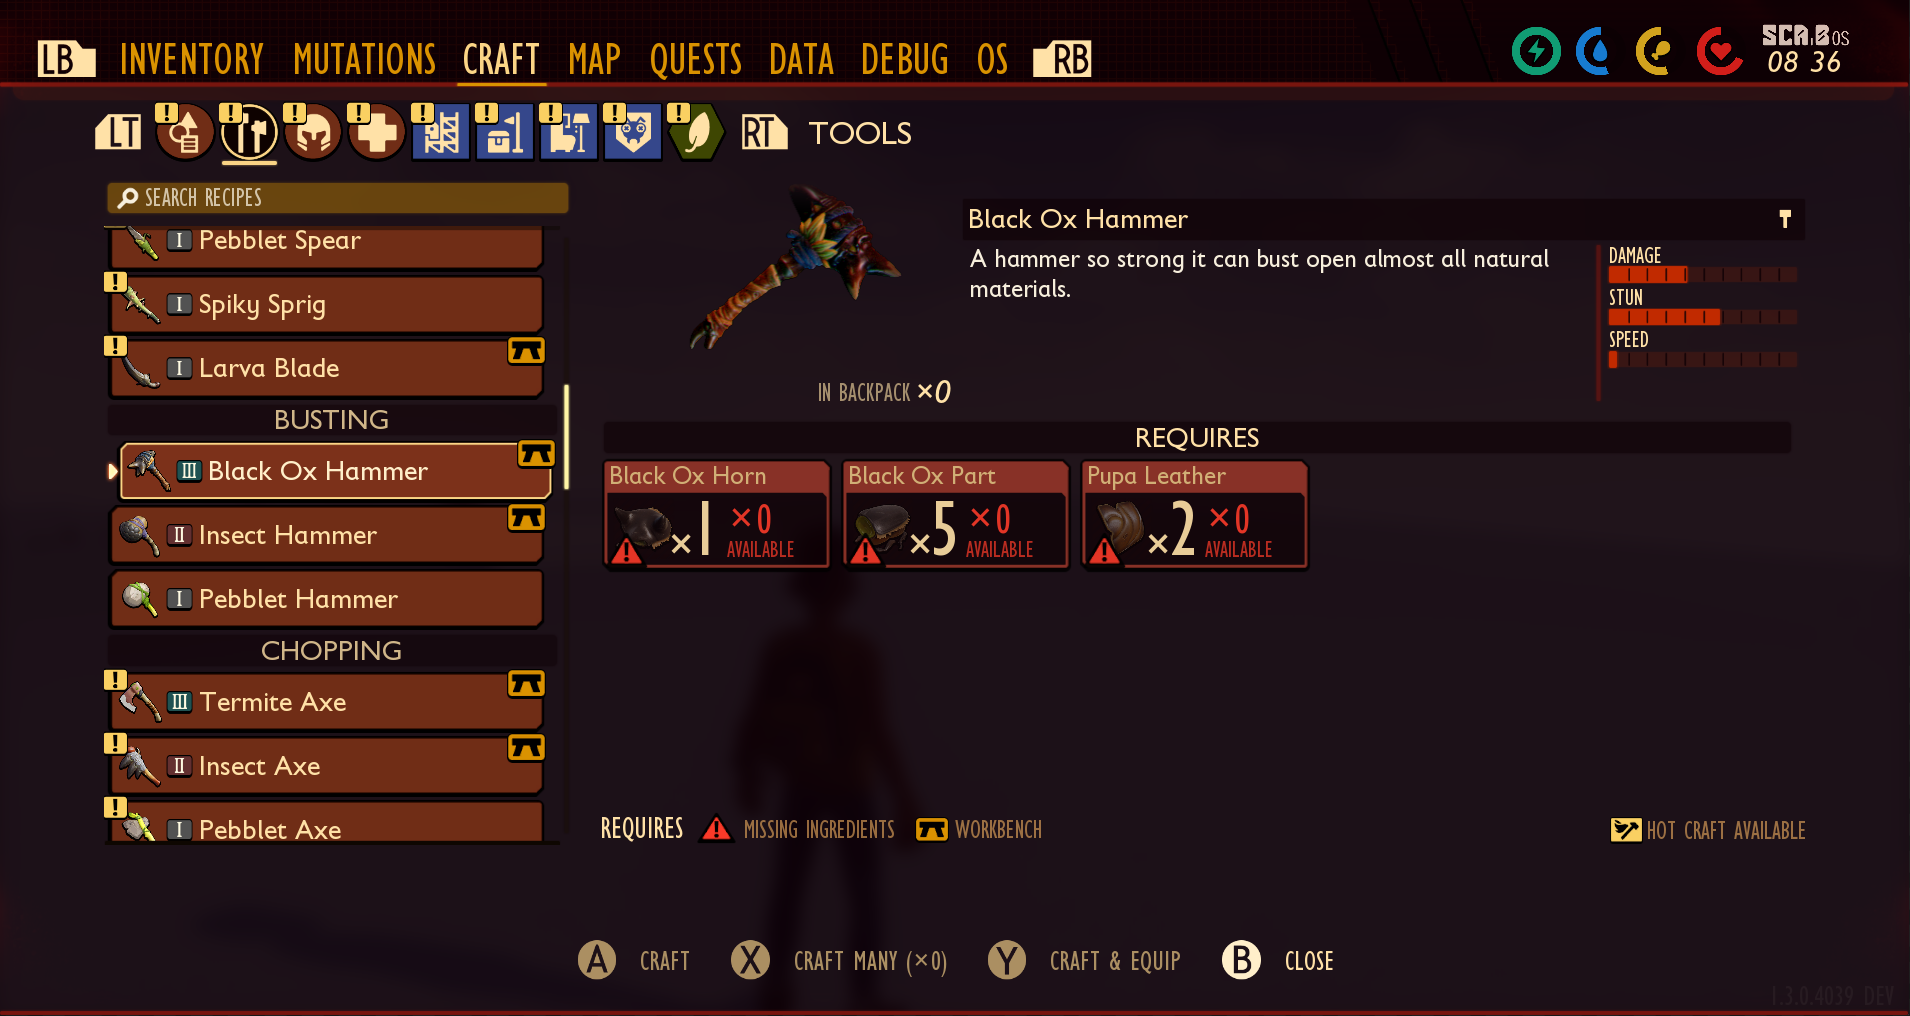 Screenshot of the game Grounded's crafting menu. In a recipe, several missing ingredients are denoted by a red caution symbol in addition to text that says 'x0 available'. There is also a key at the bottom that denotes that the caution symbol means missing ingredients.